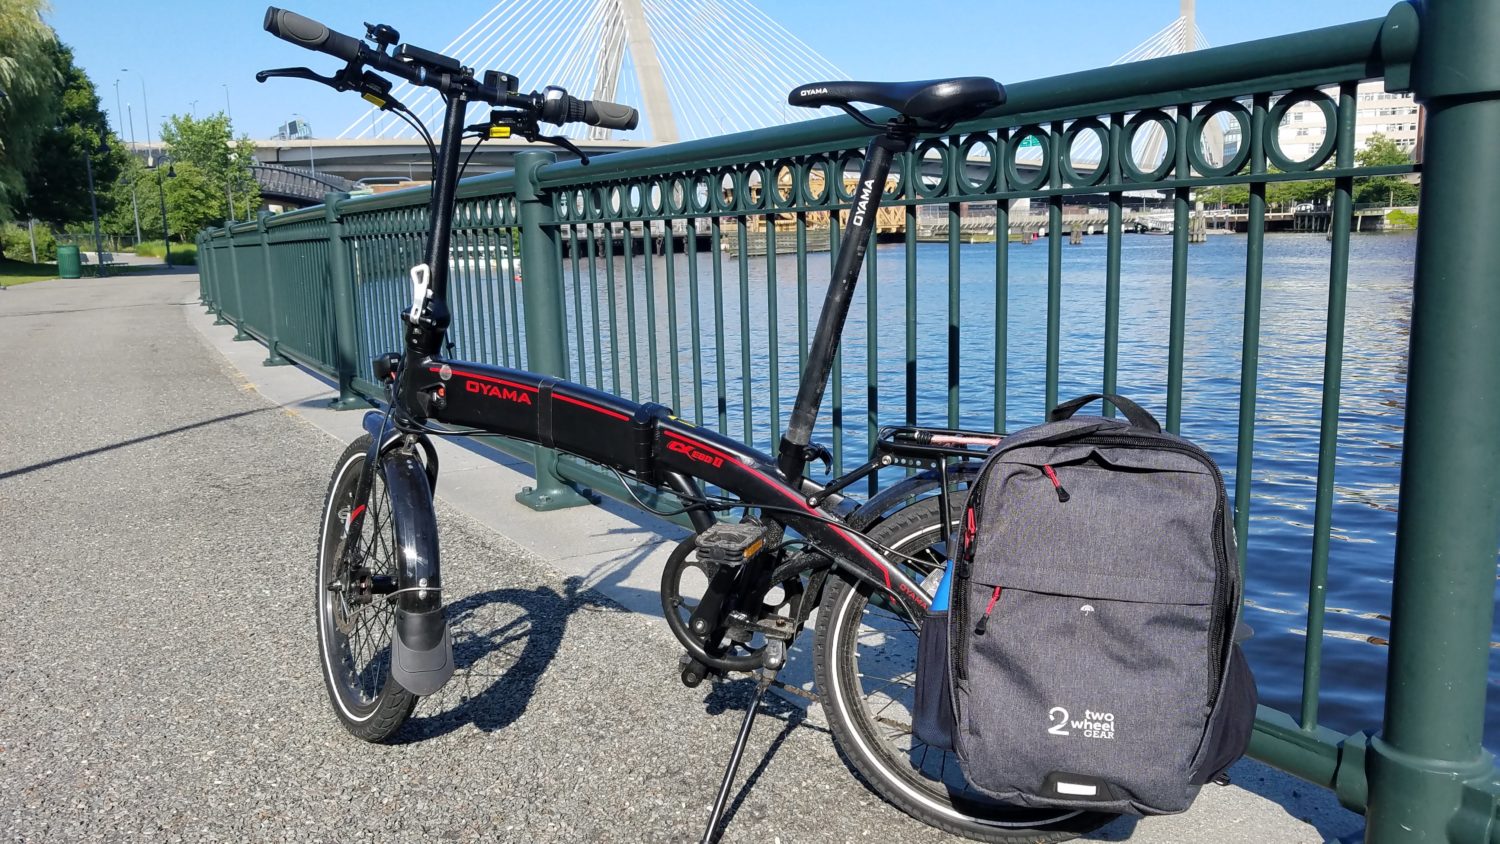 Review: 2 Wheel Gear’s Pannier Backpack 1.1 is a clever clip-on pack